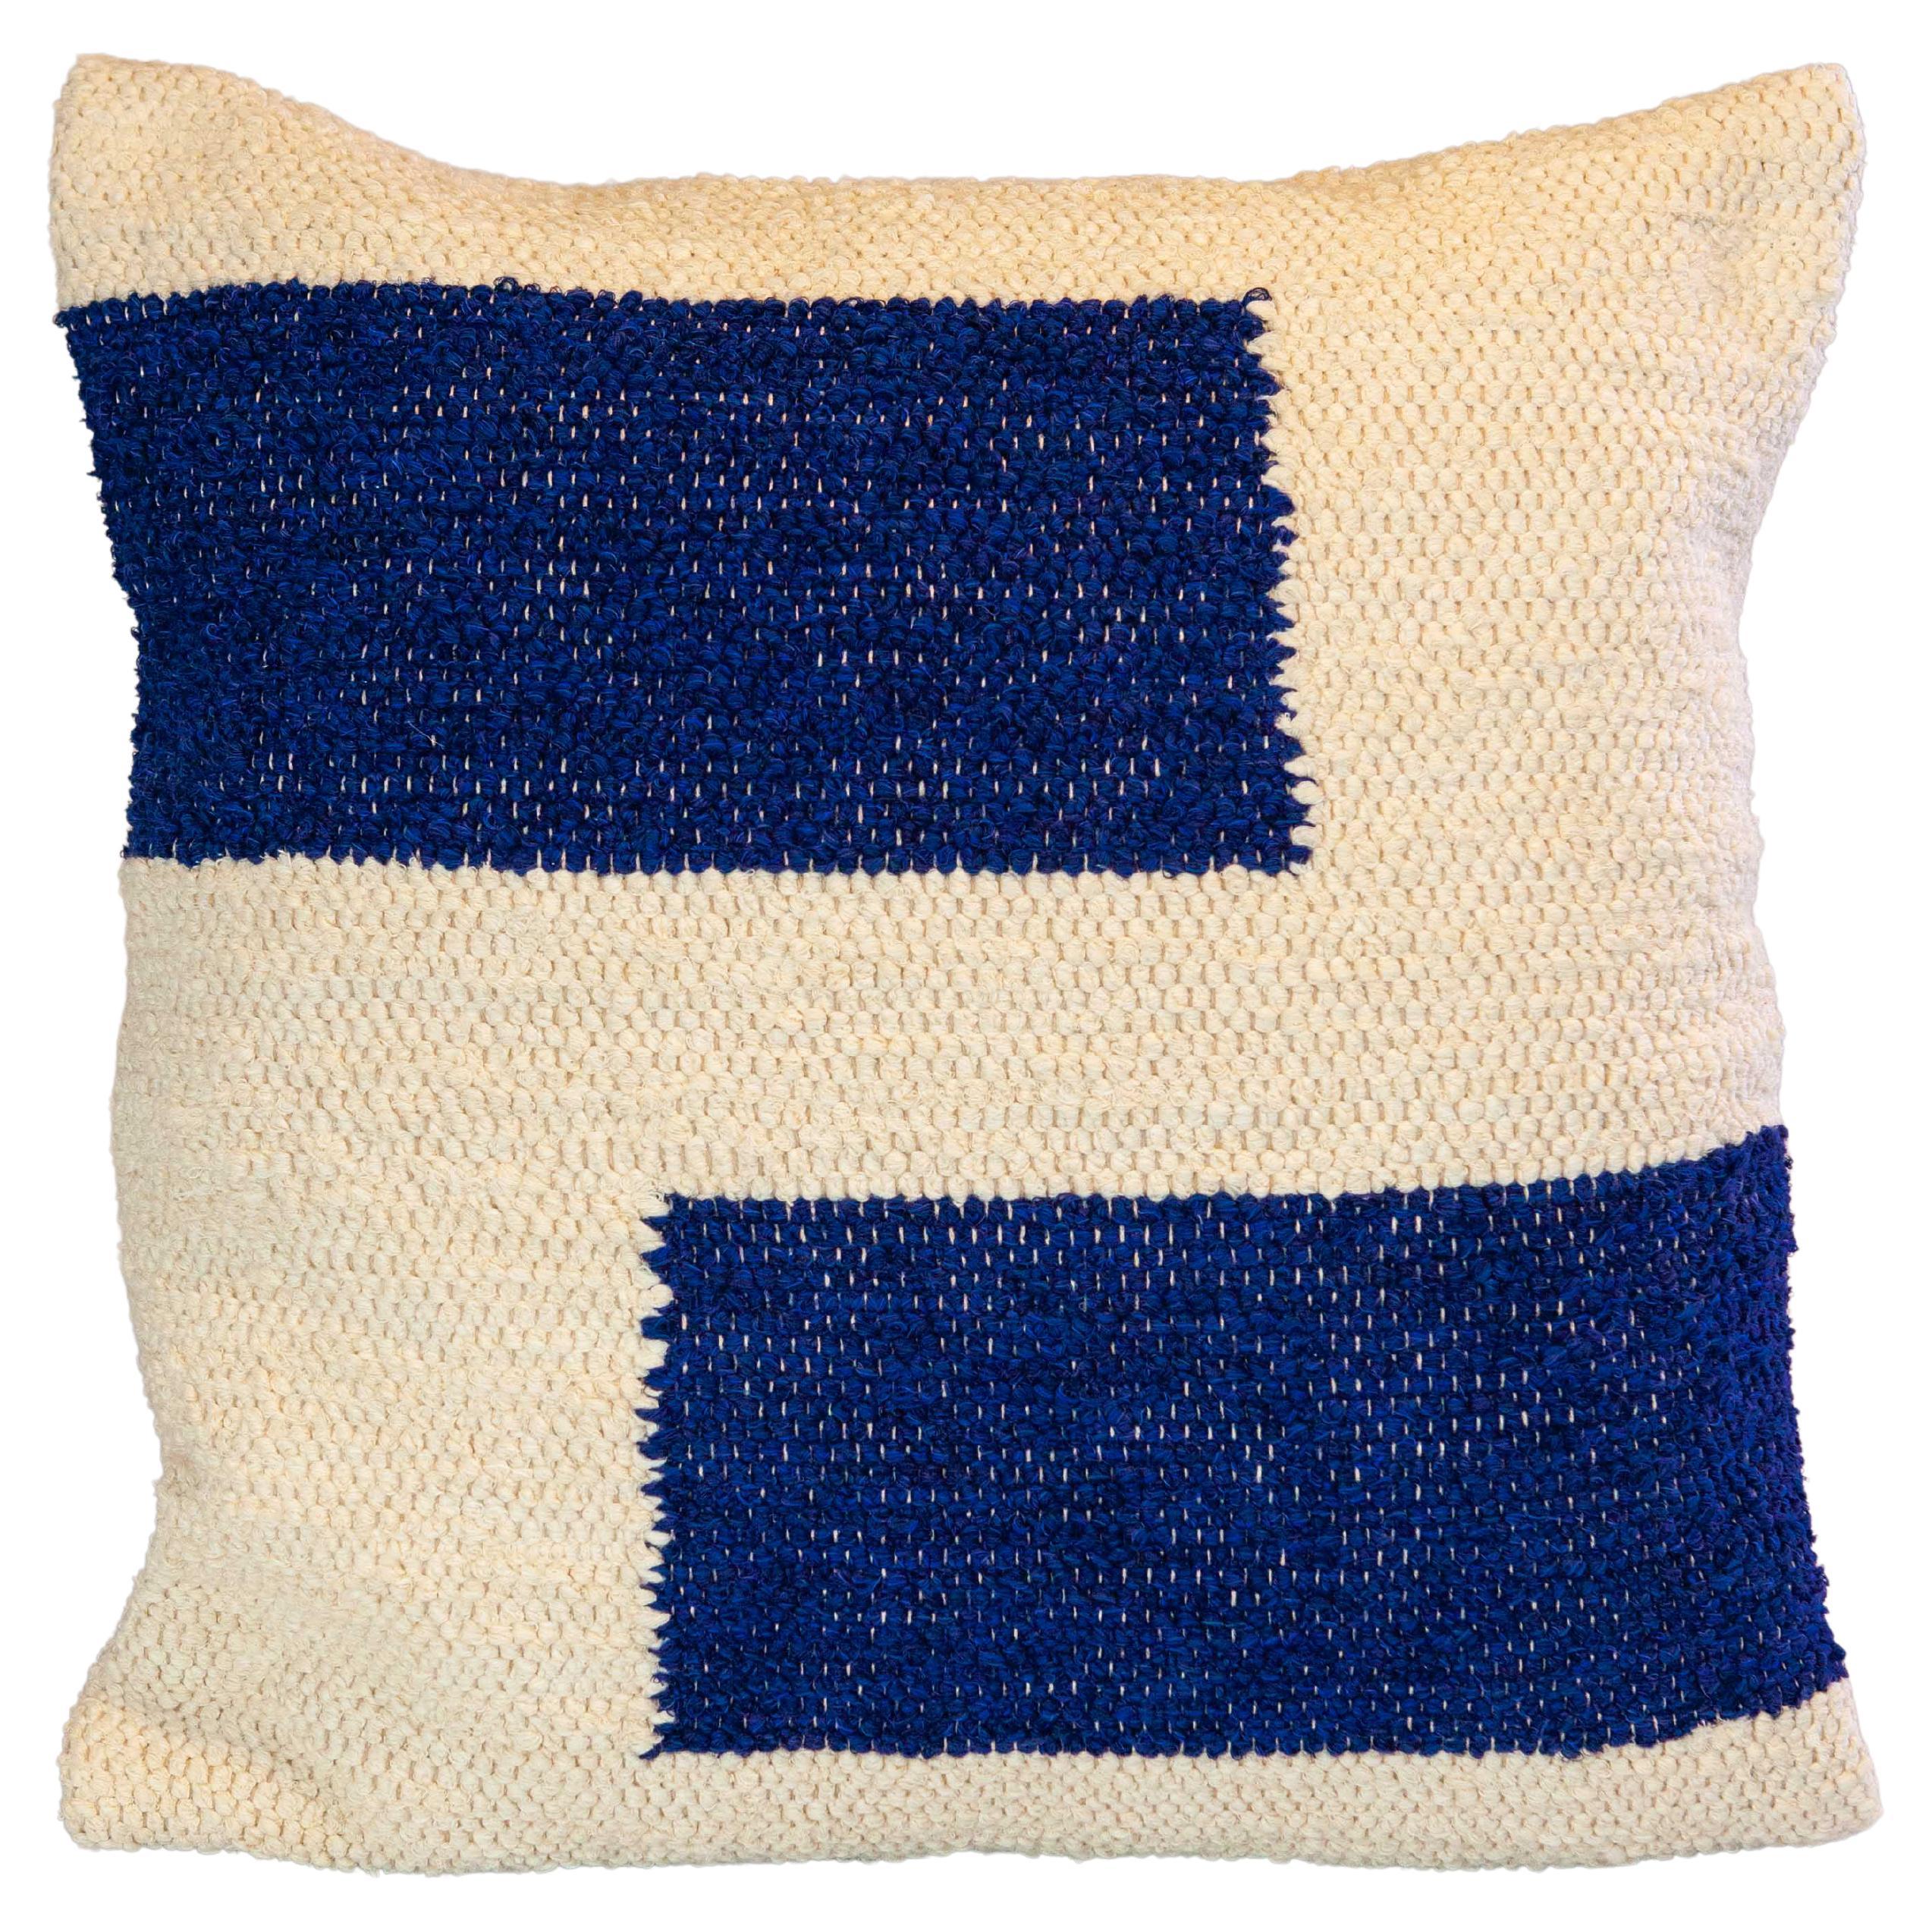 Handwoven Recycled Cotton Navy Blue Maze Throw Pillow, in Stock